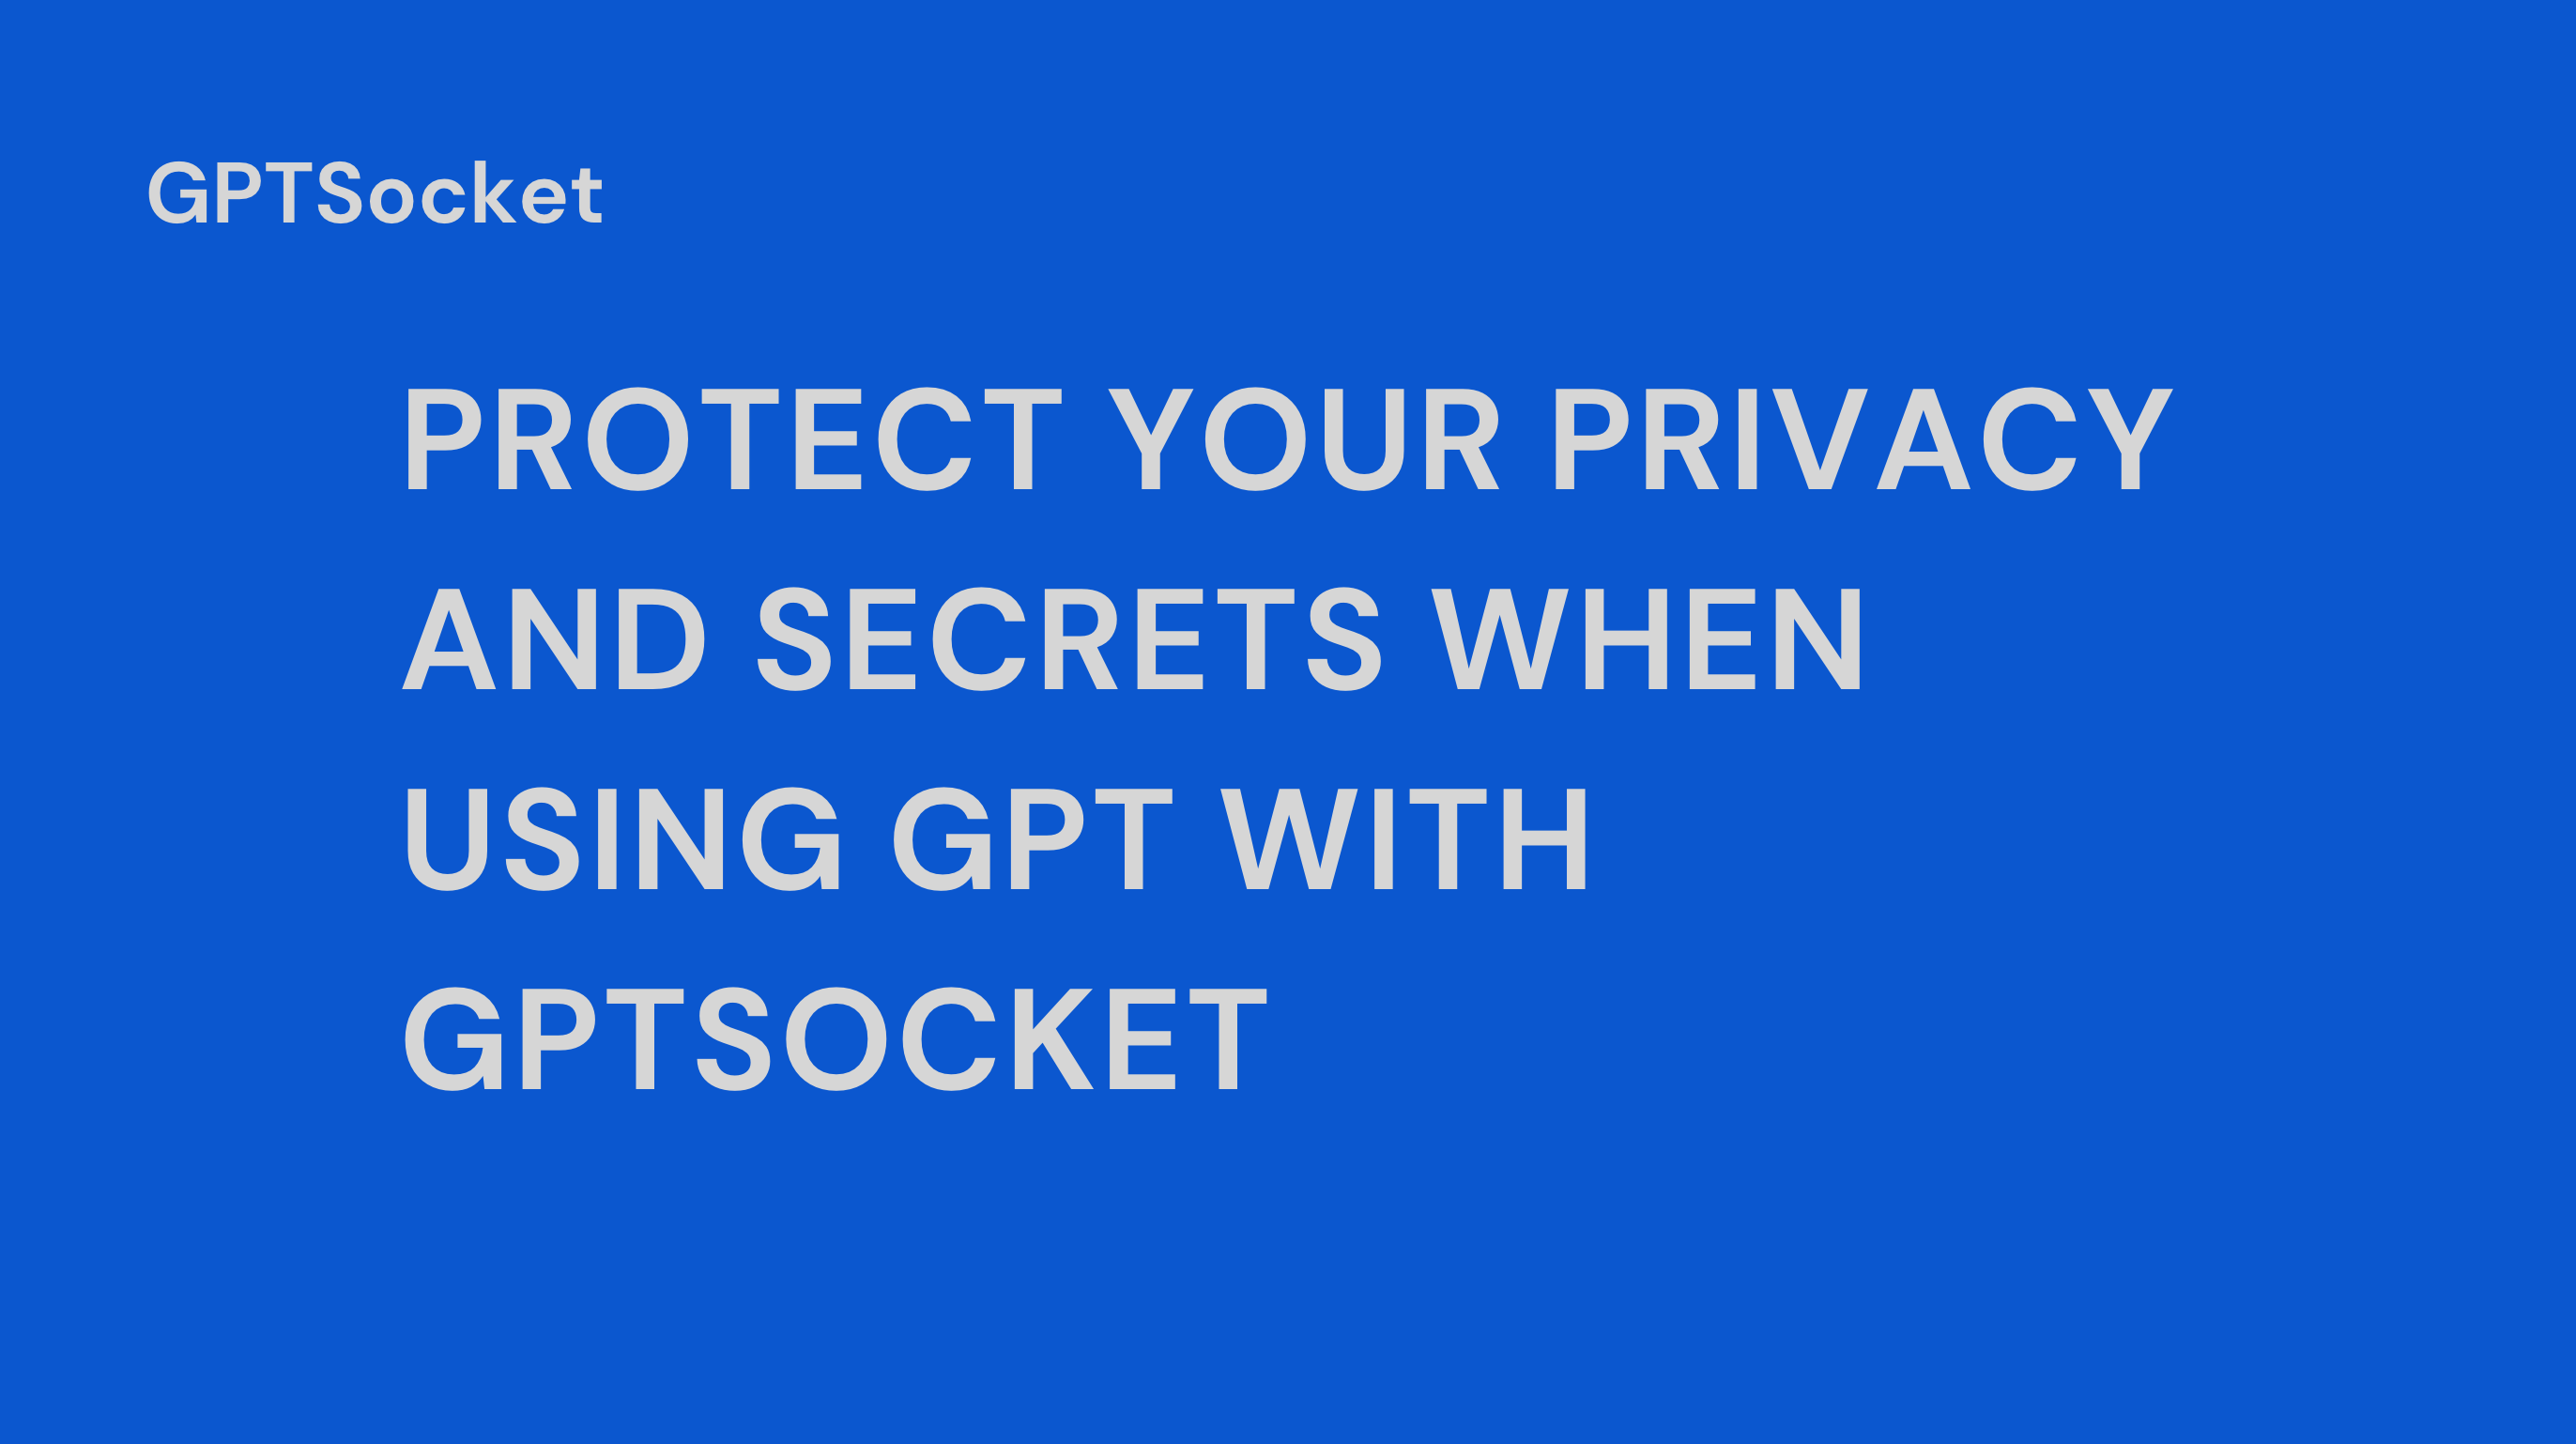 Protect Your Privacy and Secrets When Using GPT with GPTSocket